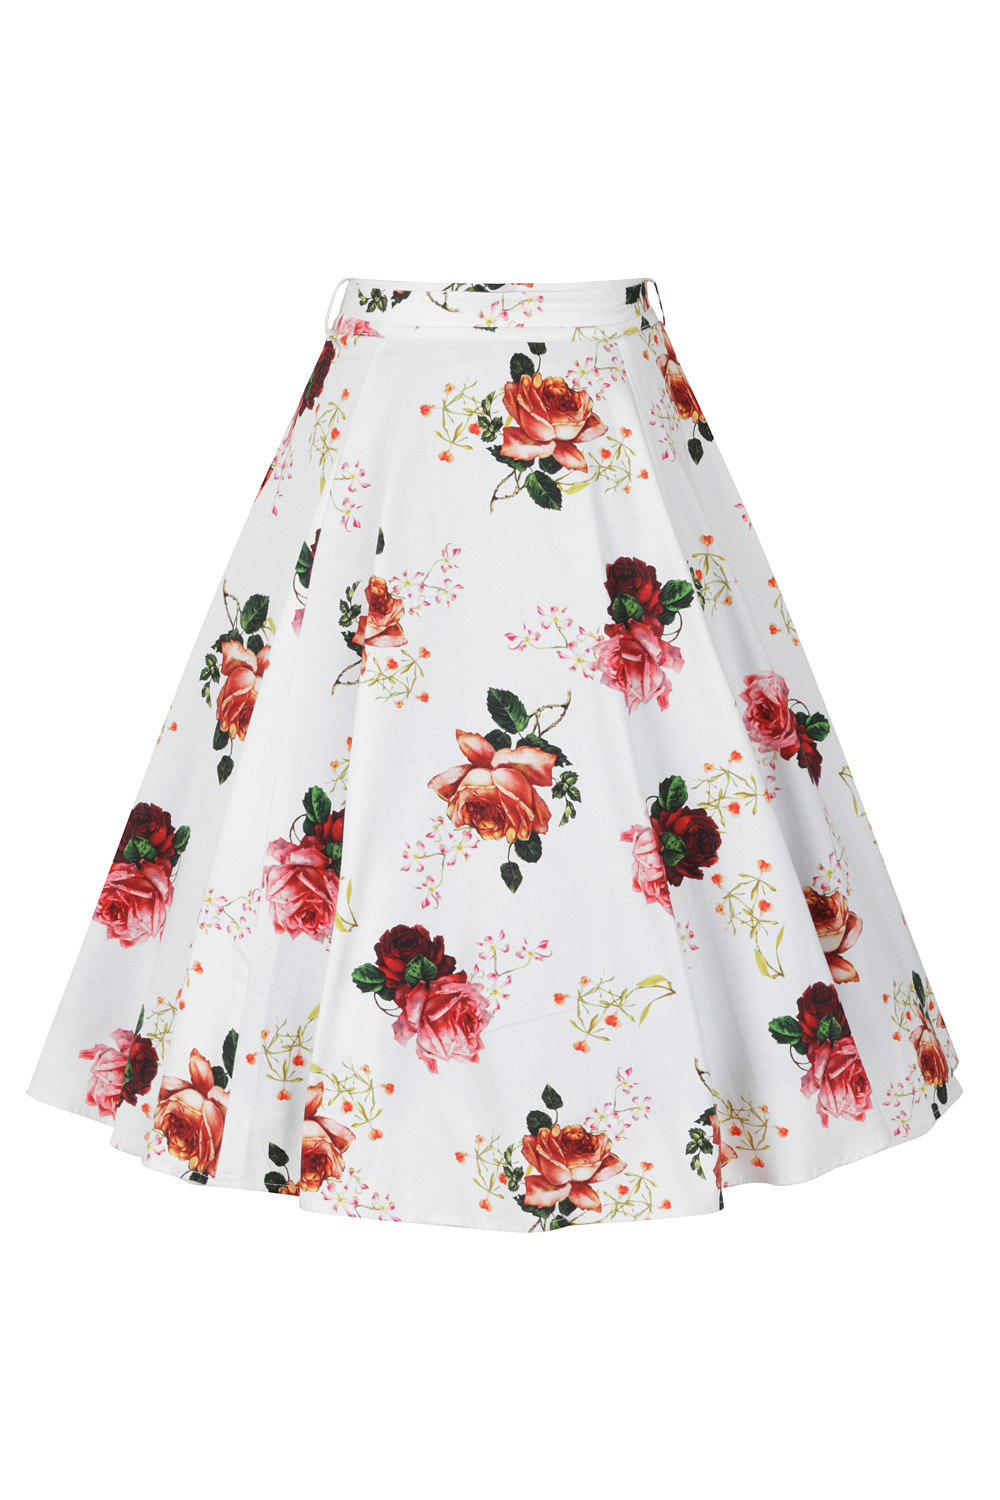 Florence Floral Swing Skirt in white - Hearts & Roses London